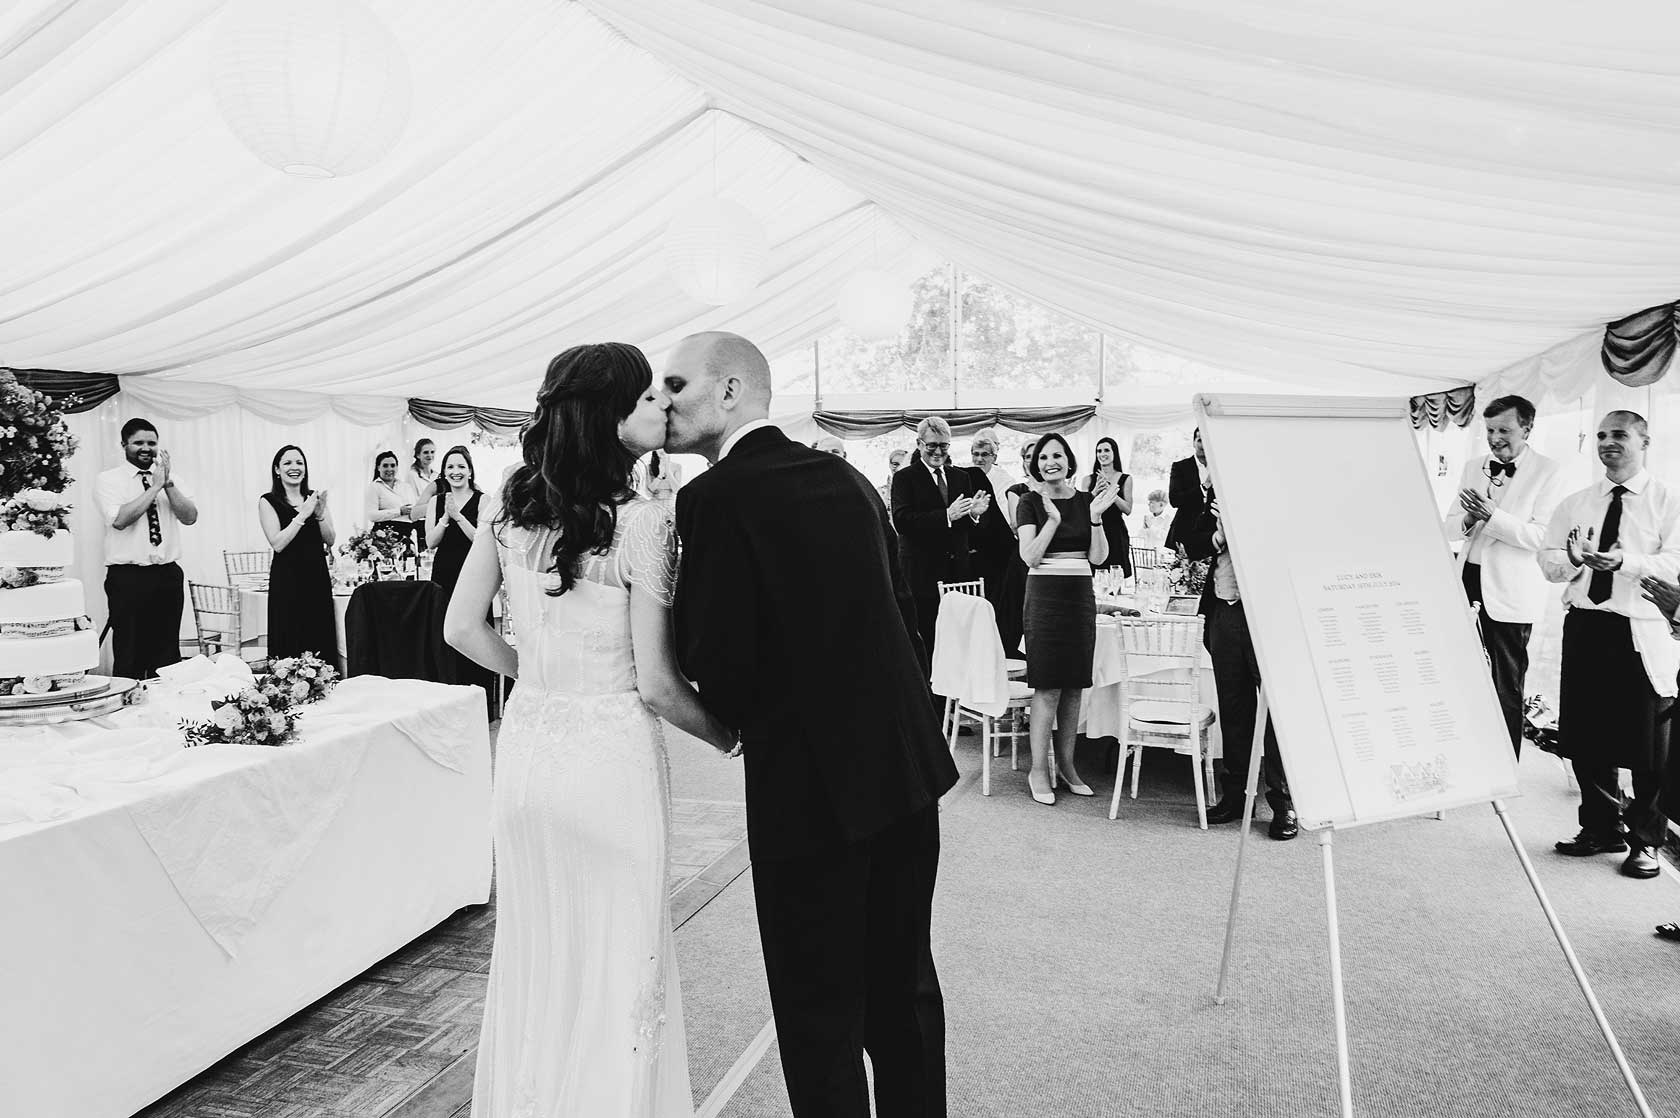 Reportage Wedding Photography at Manor House Hotel